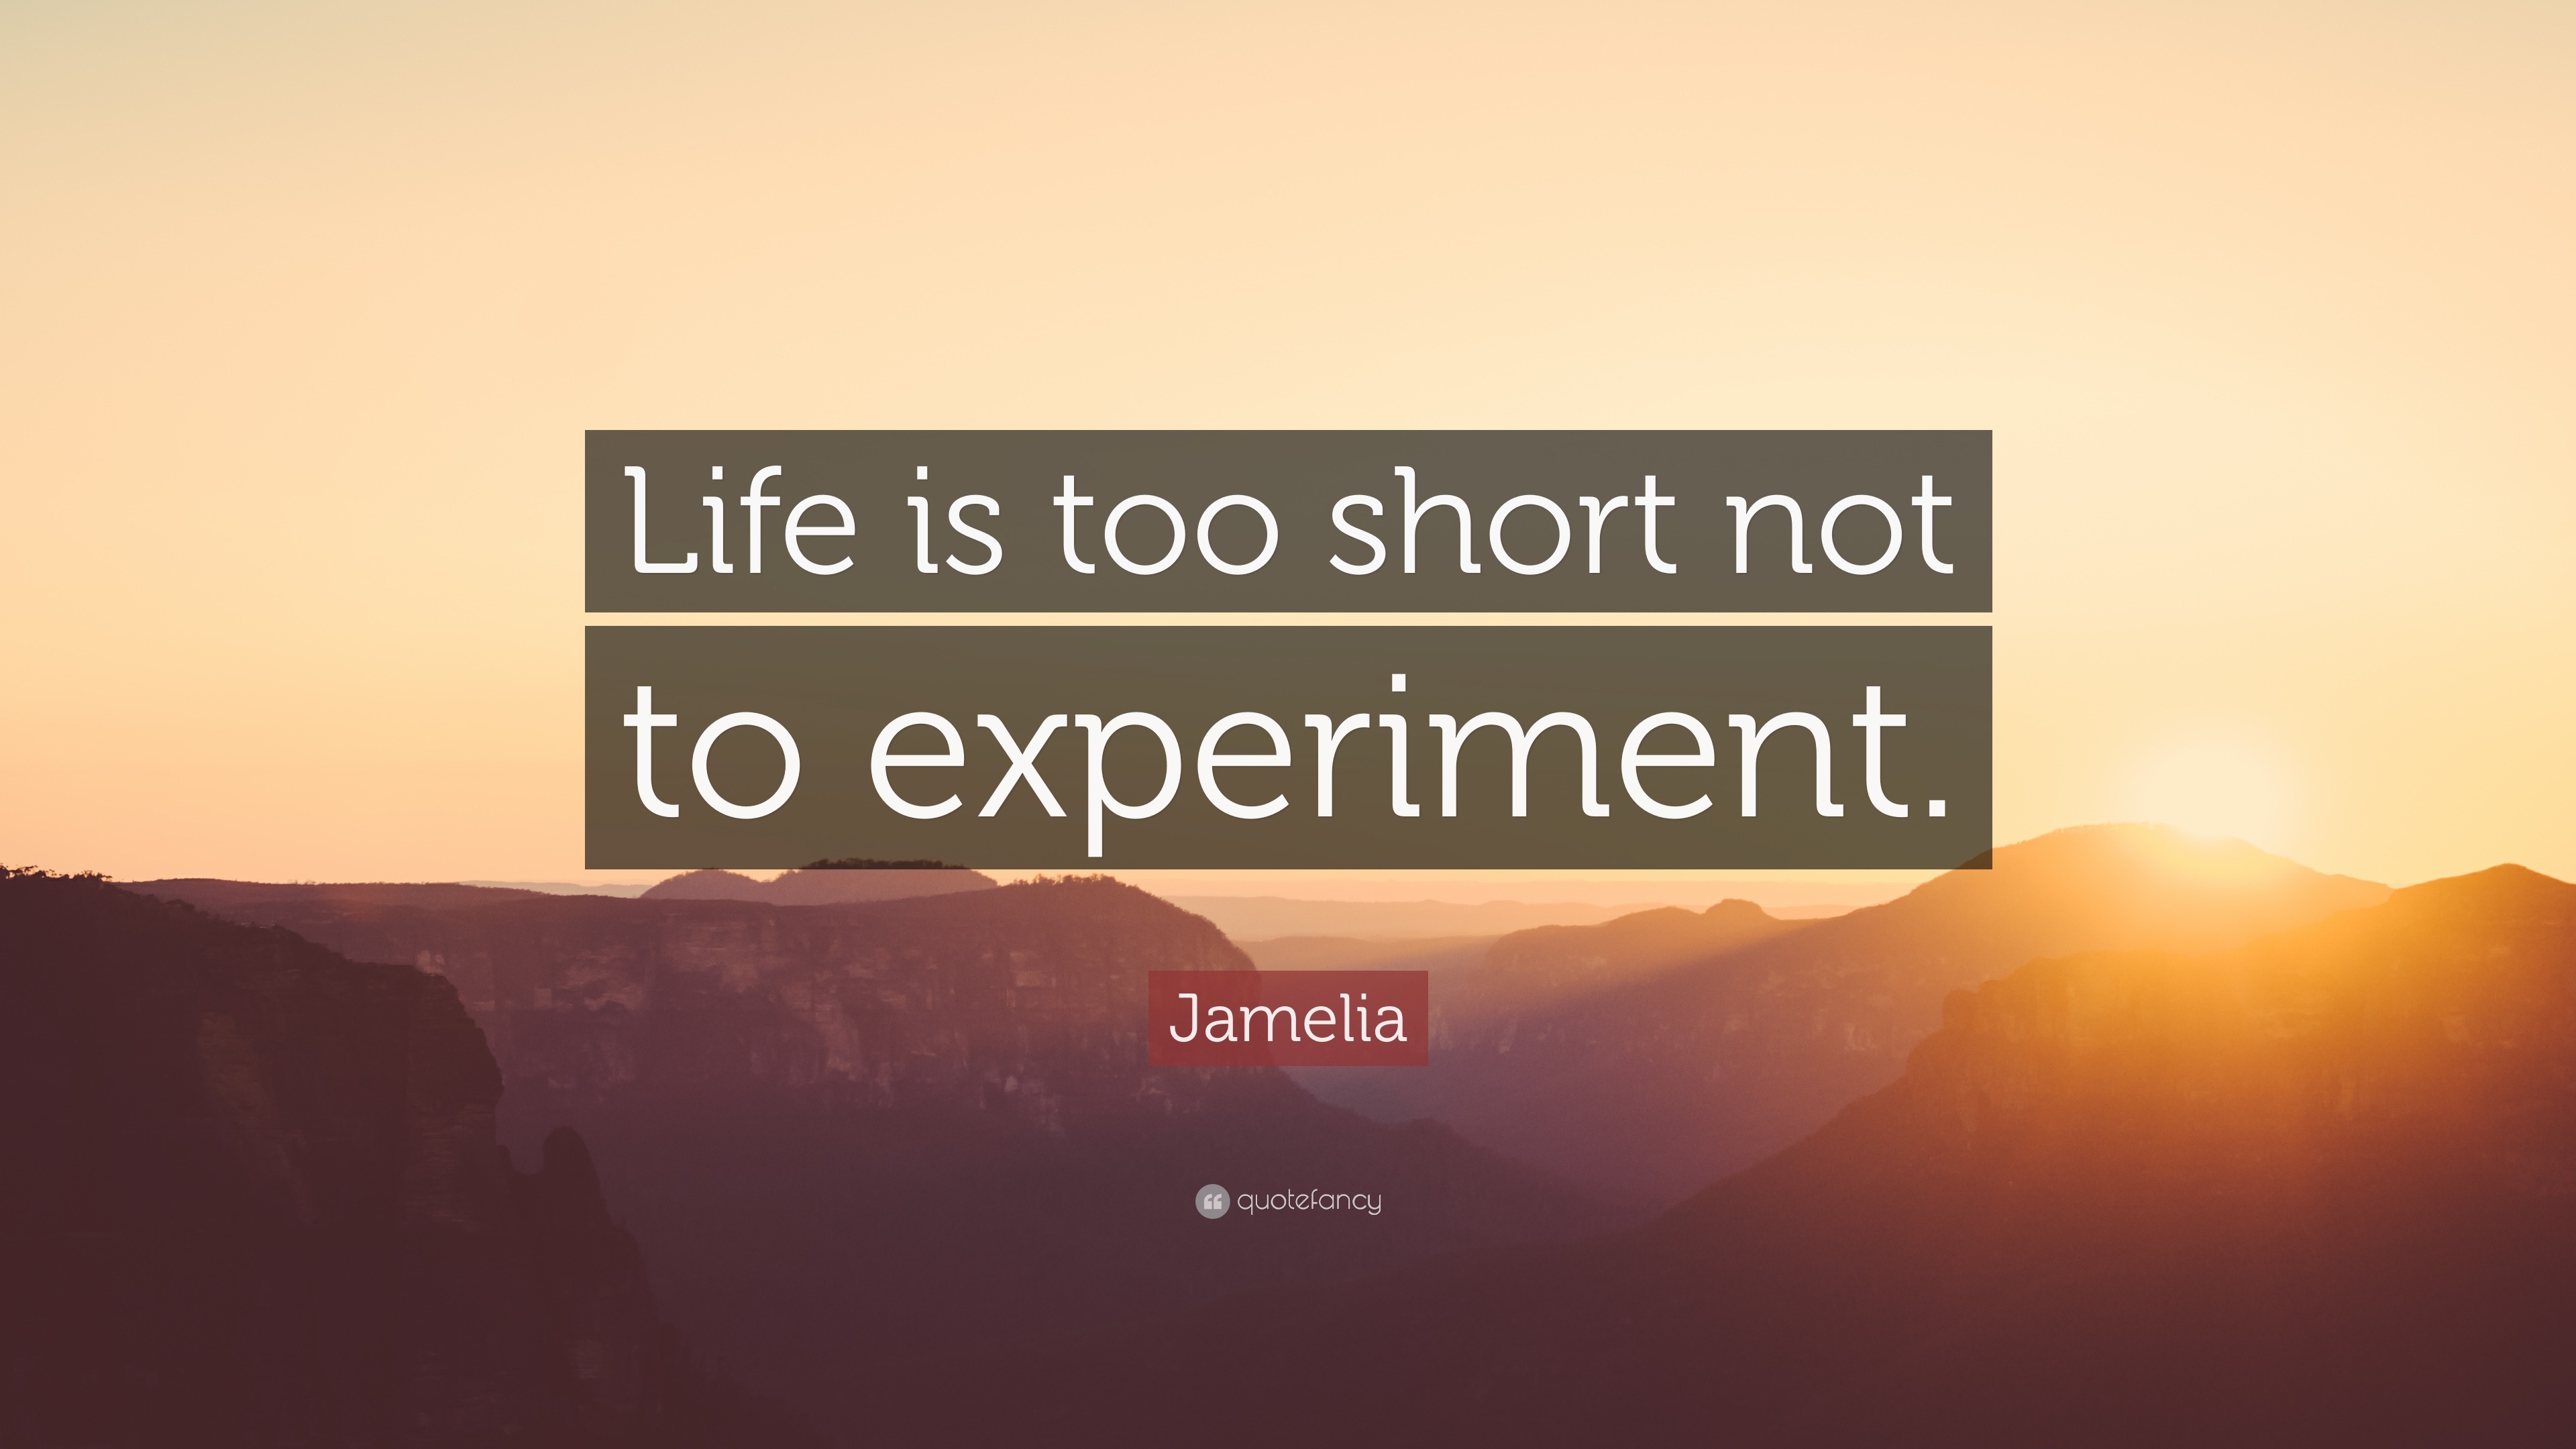 Life is too short not to experiment